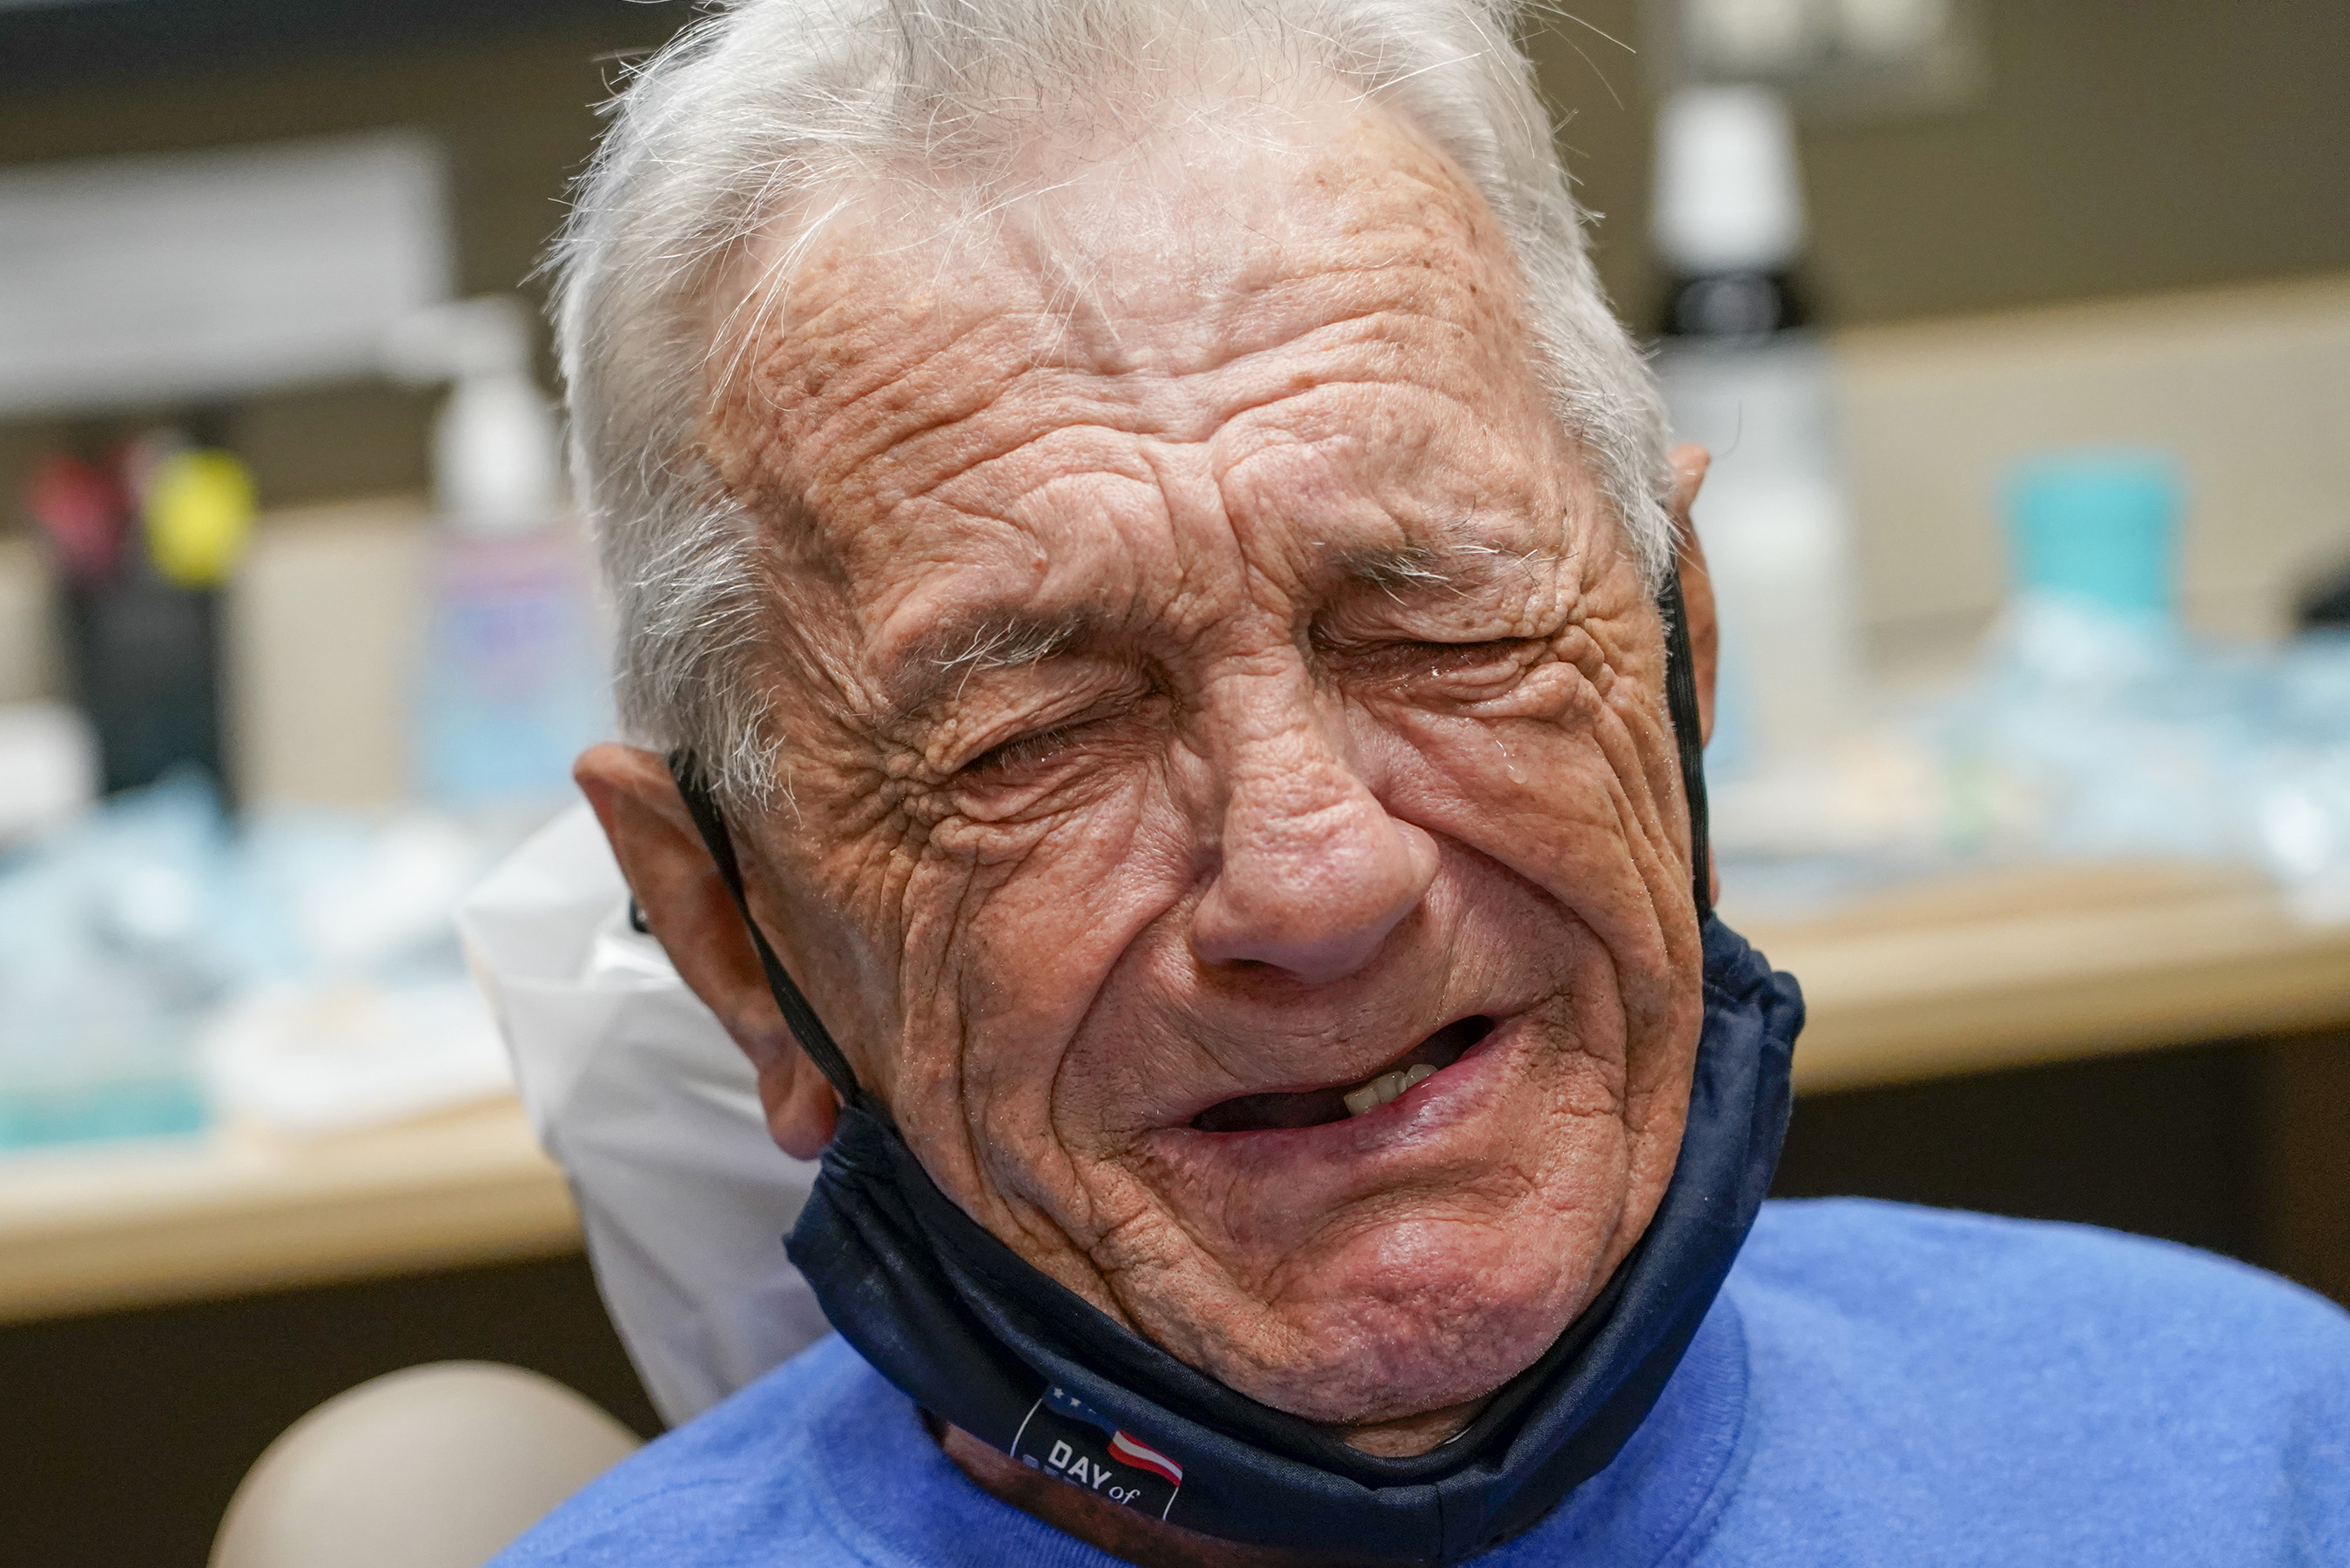 Navy veteran Kenny Jary of Mahtomedi, Minn., becomes emotional as he talks about the services offered by Aspen Dental, Saturday, Nov. 6, 2021, in Forest Lake, Minn. (Craig Lassig/AP Images for Aspen Dental)